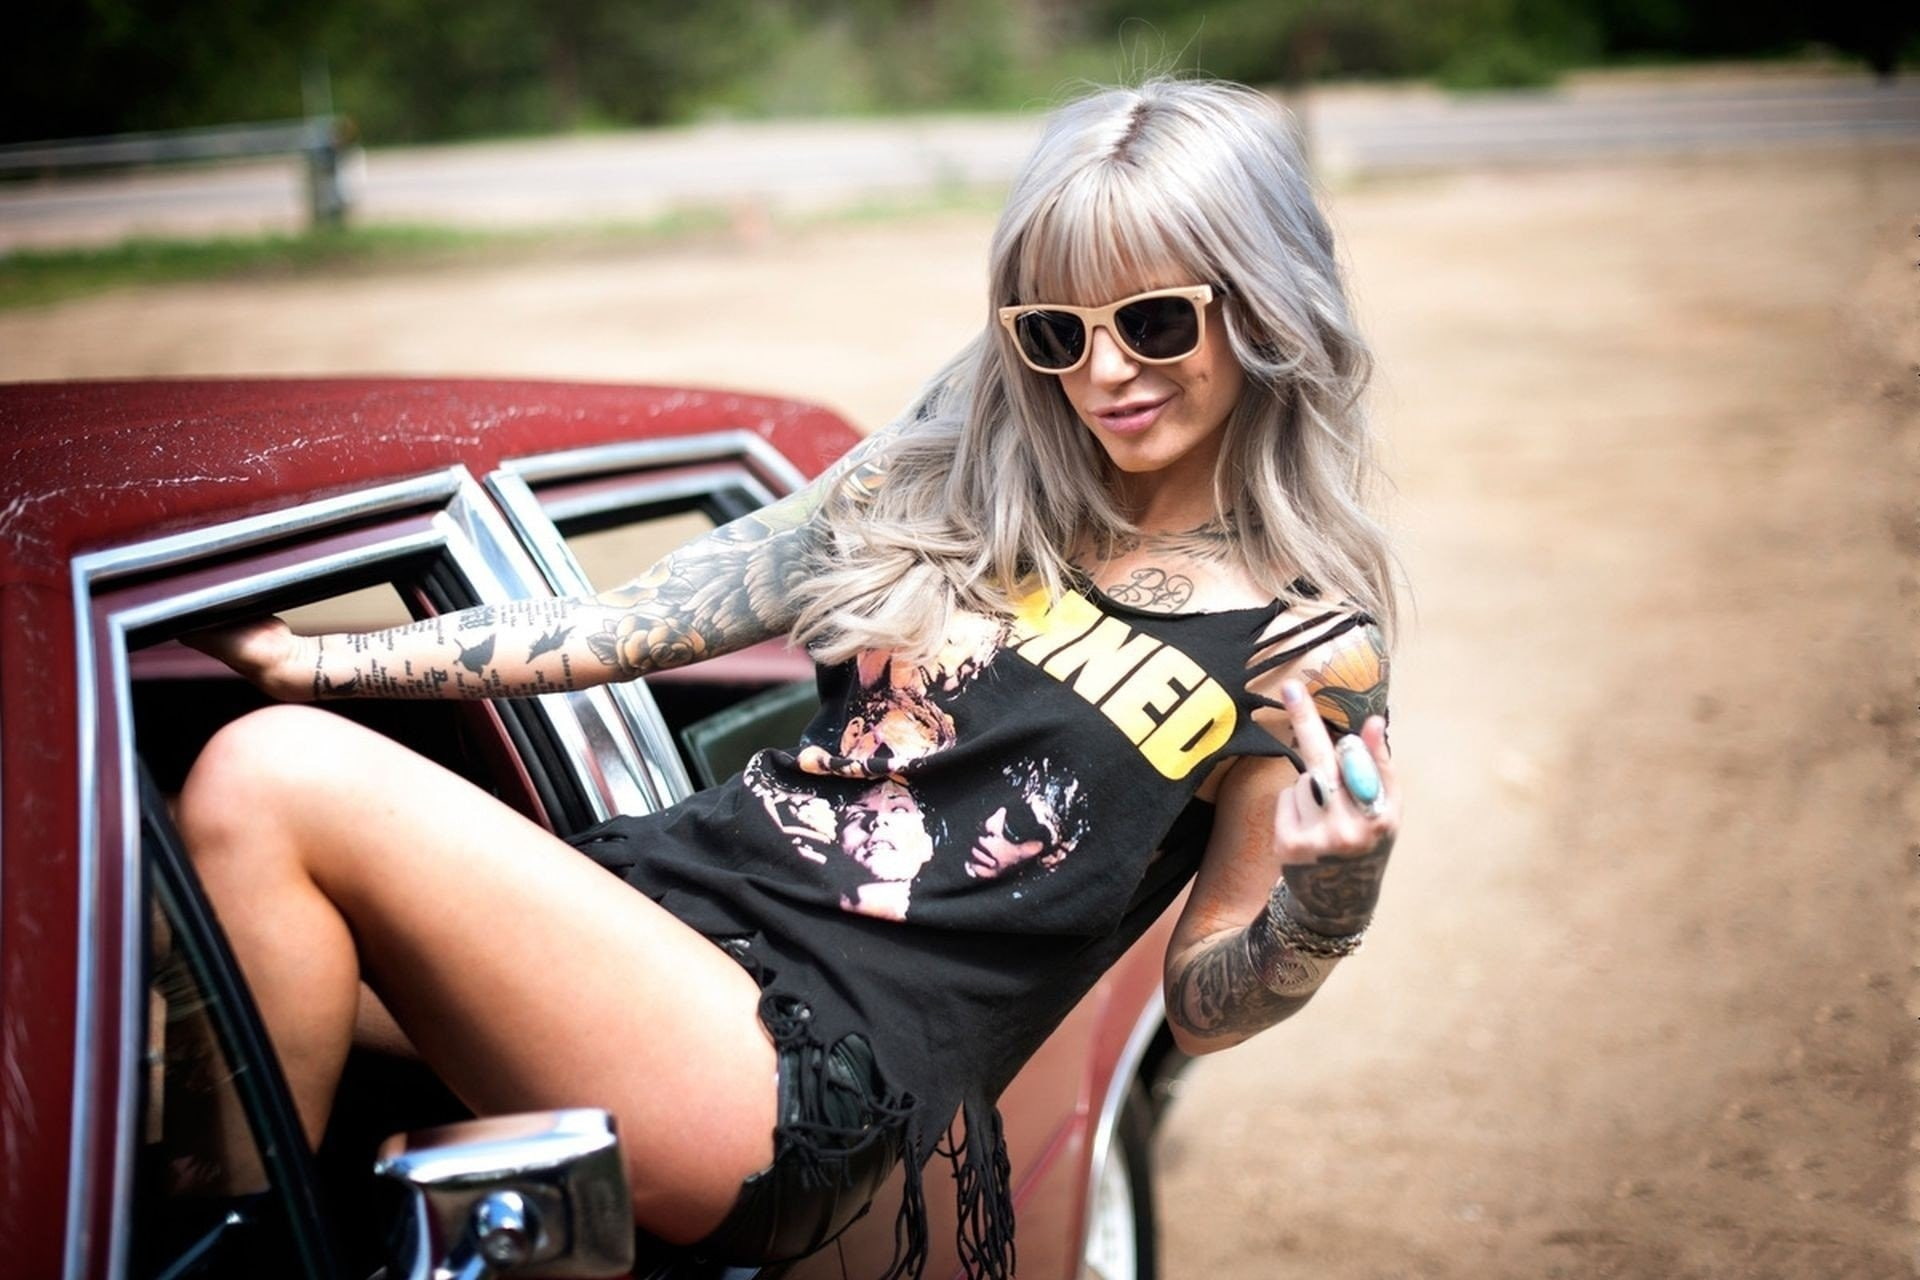 women, dyed hair, jean shorts, leaning, tattoo, sunglasses